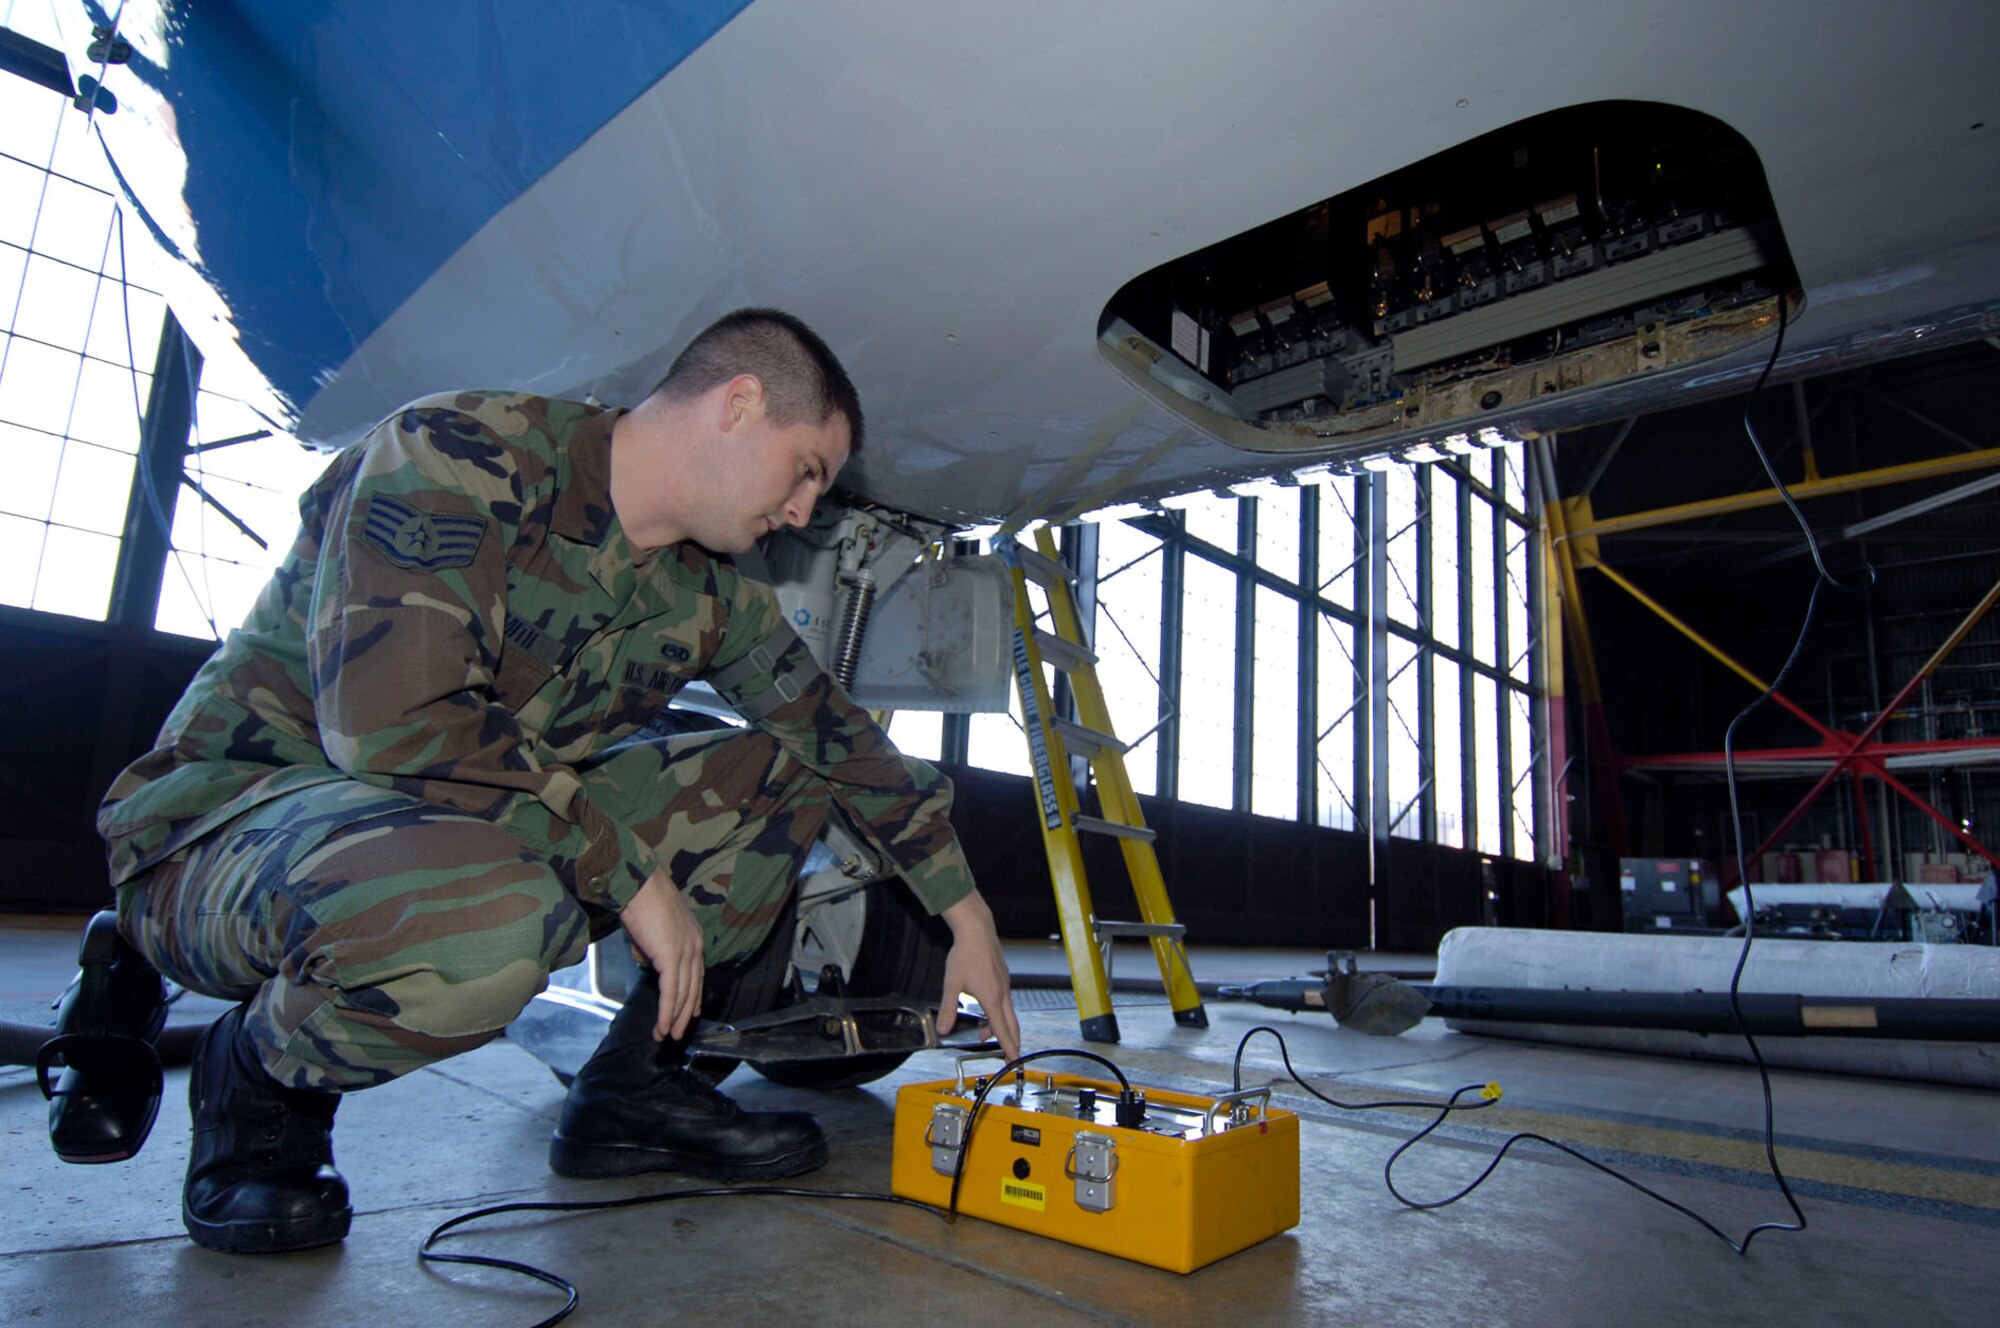 Staff Sgt. Stephen Smith, a communication and navigation systems craftsman, conducts a transponder test on a C-9C Skytrain aircraft in hangar one, Scott AFB, Ill.  Assigned to the 932nd Airlift Wing, the C-9C, along with the C-40C, provide safe, comfortable, and reliable transportation for dignitaries.
U.S. Air Force photo/Tech. Sgt. Tony R. Tolley 